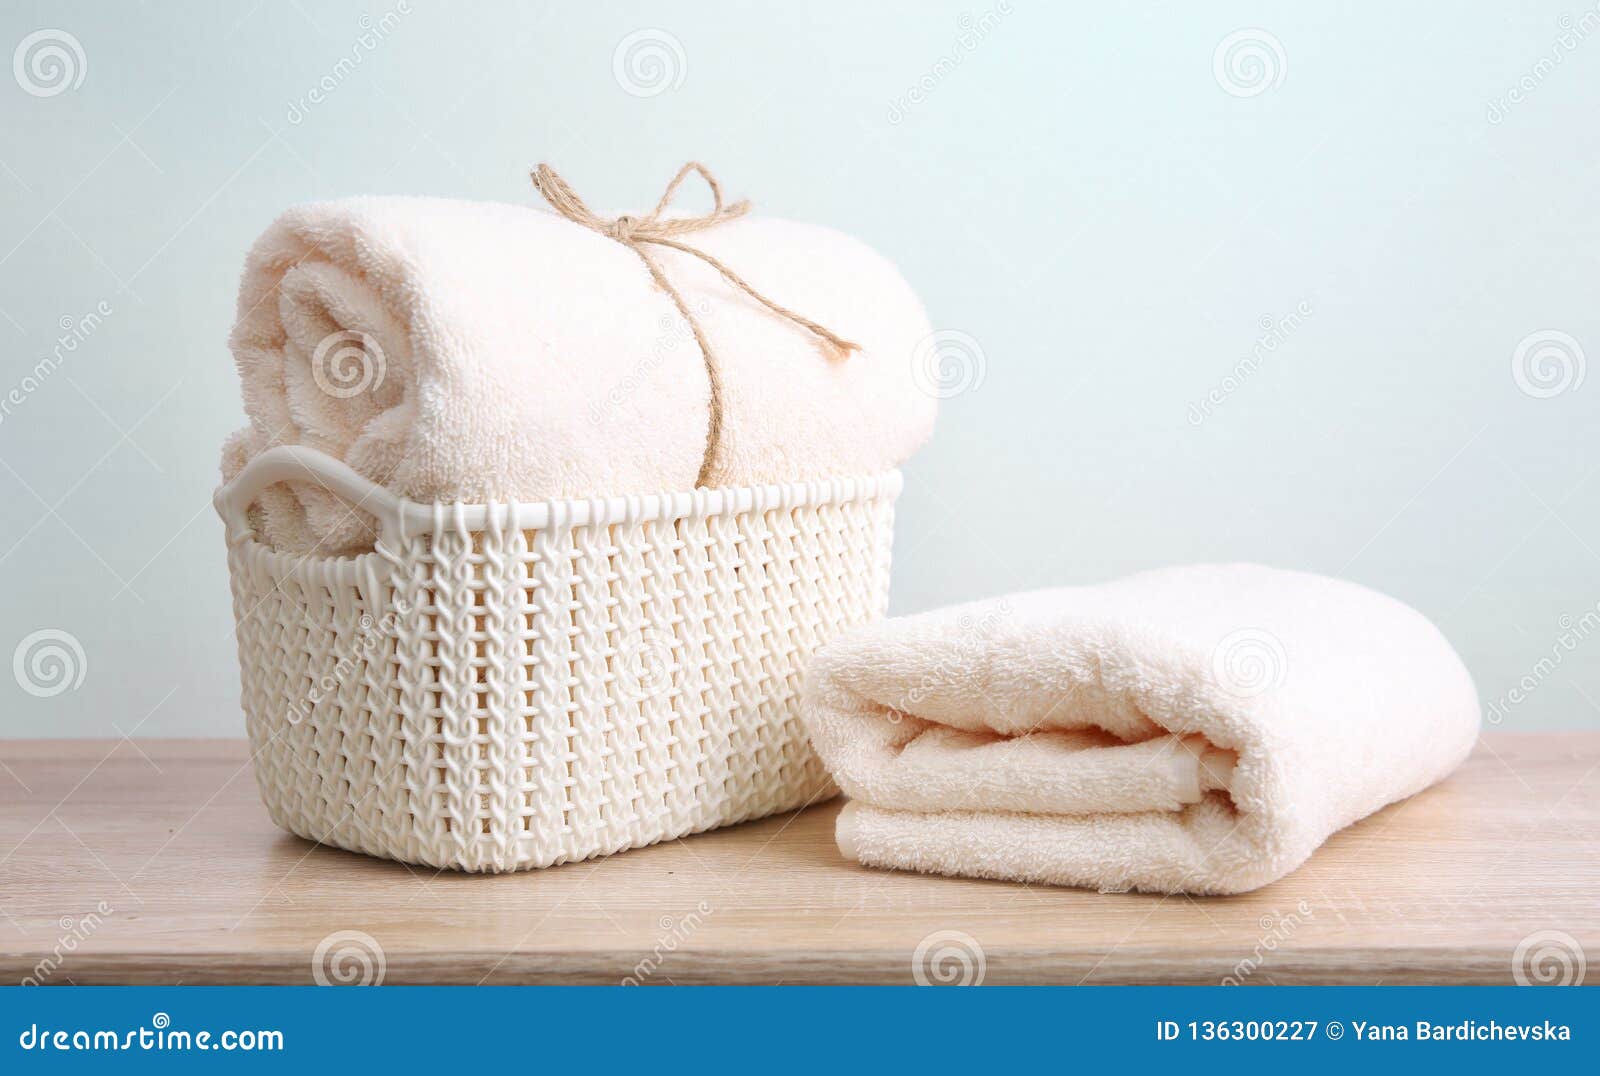 https://thumbs.dreamstime.com/z/fresh-clean-towels-wooden-table-towel-bascket-stack-empty-copy-space-background-136300227.jpg